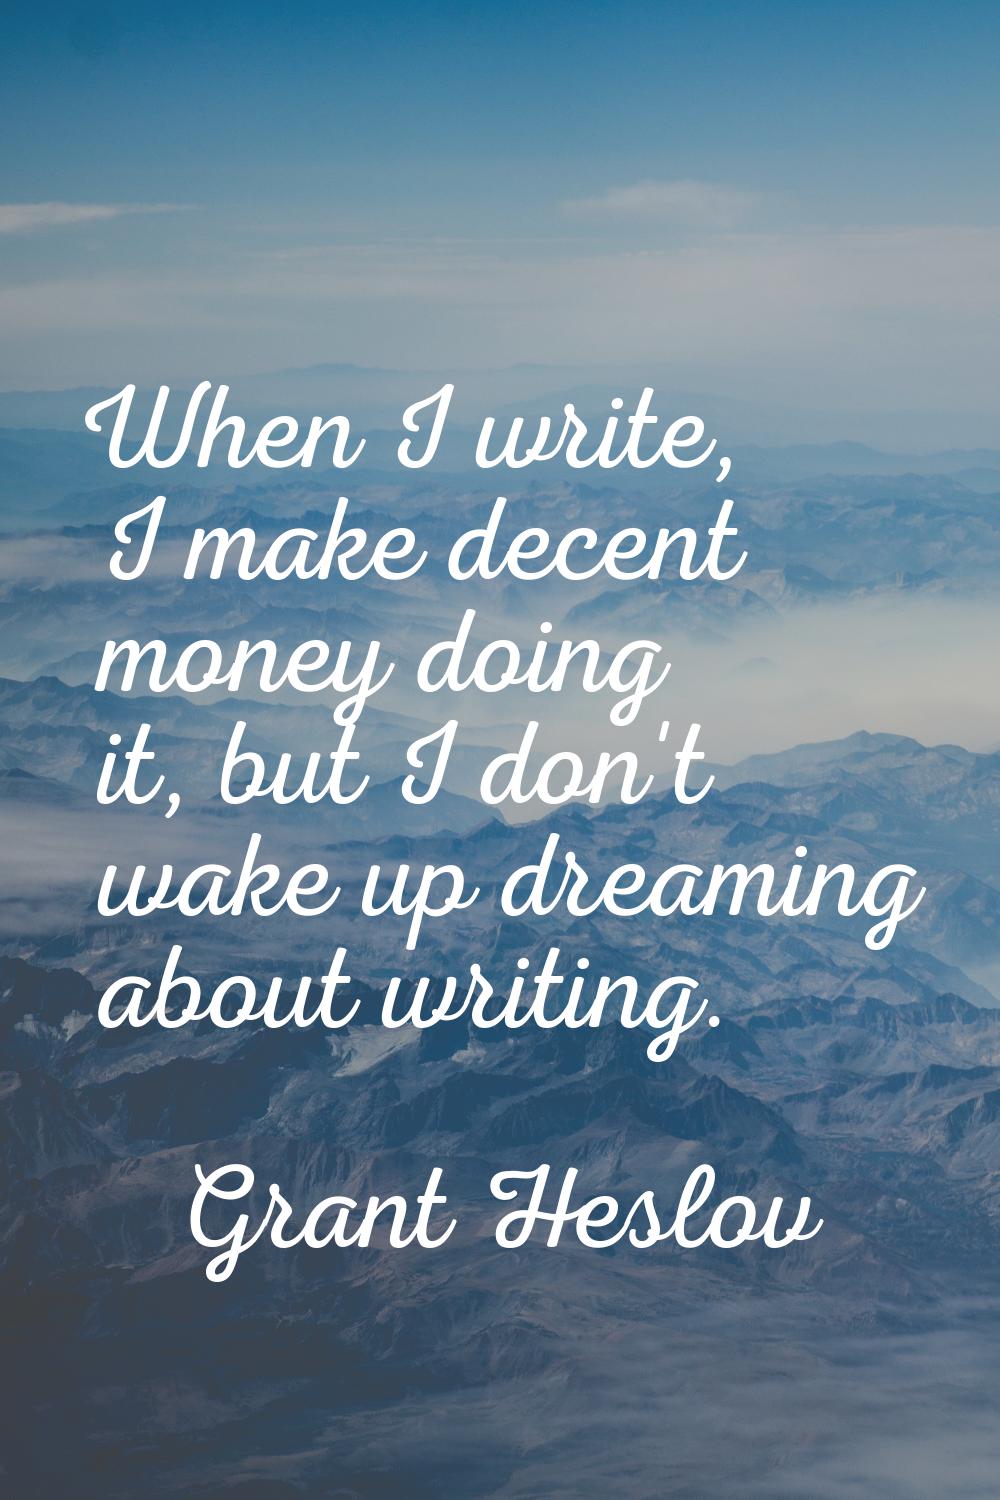 When I write, I make decent money doing it, but I don't wake up dreaming about writing.